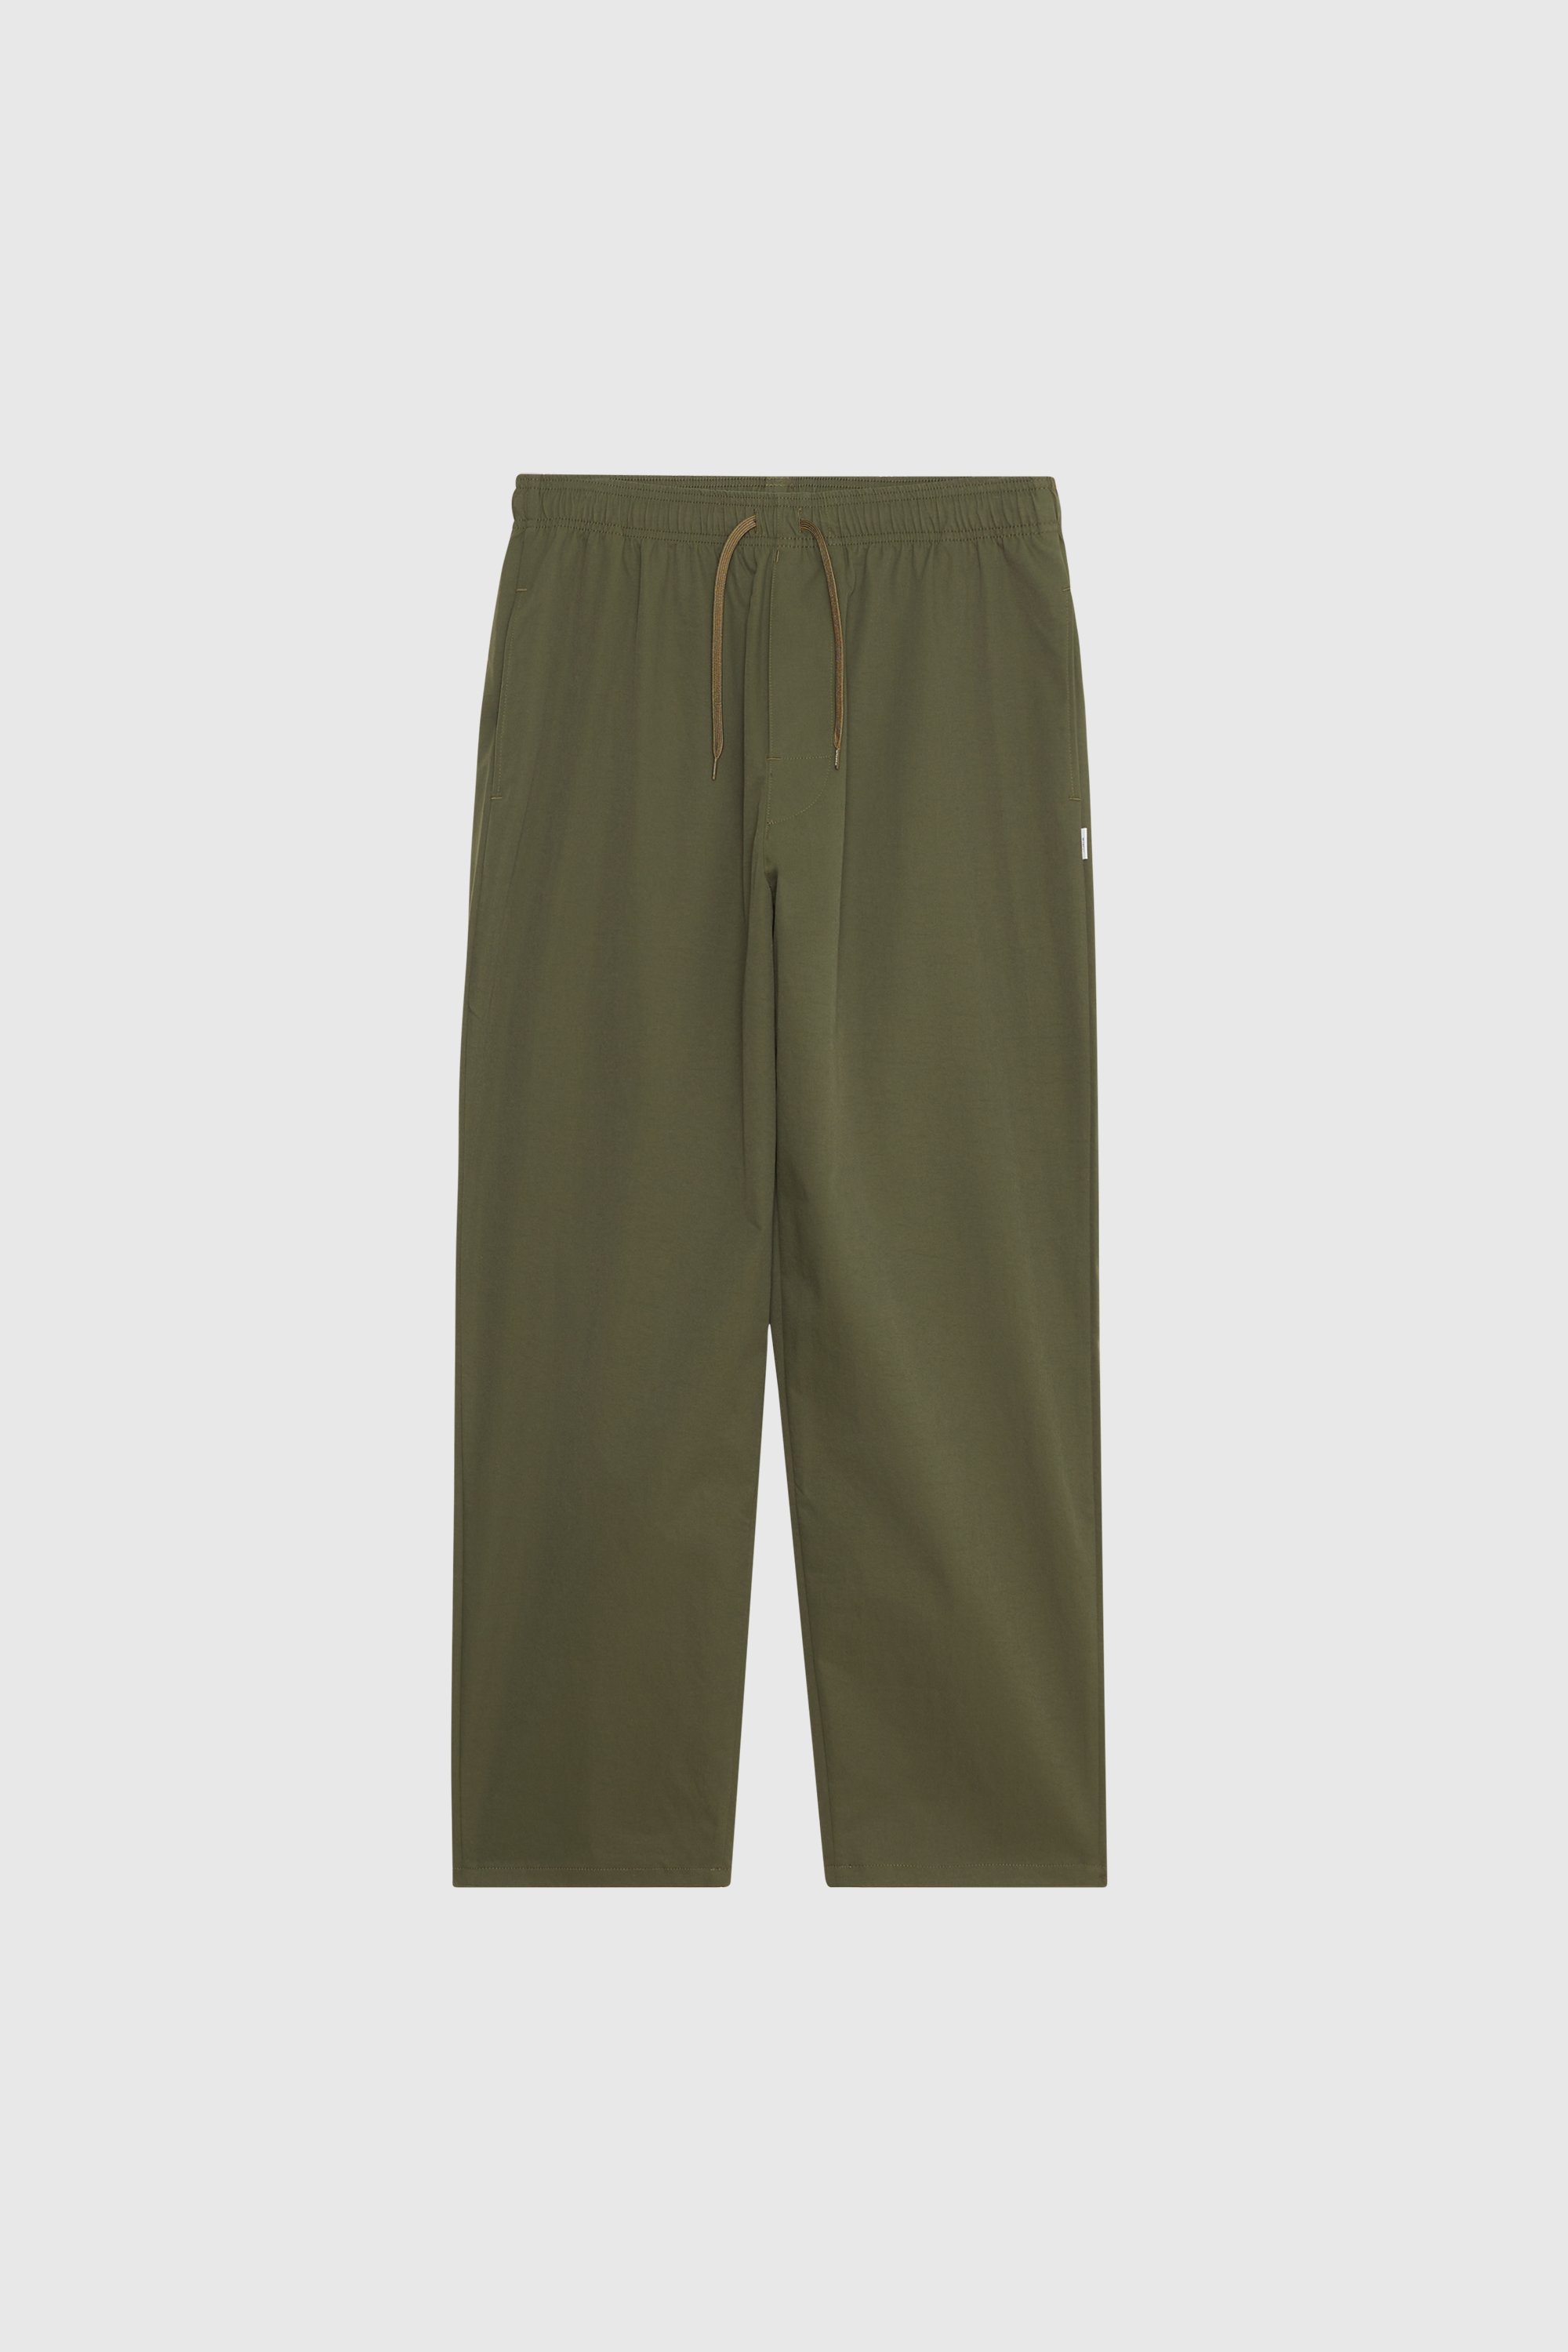 WTAPS 2022SS SEAGULL 01 OLIVE DRAB S 01-